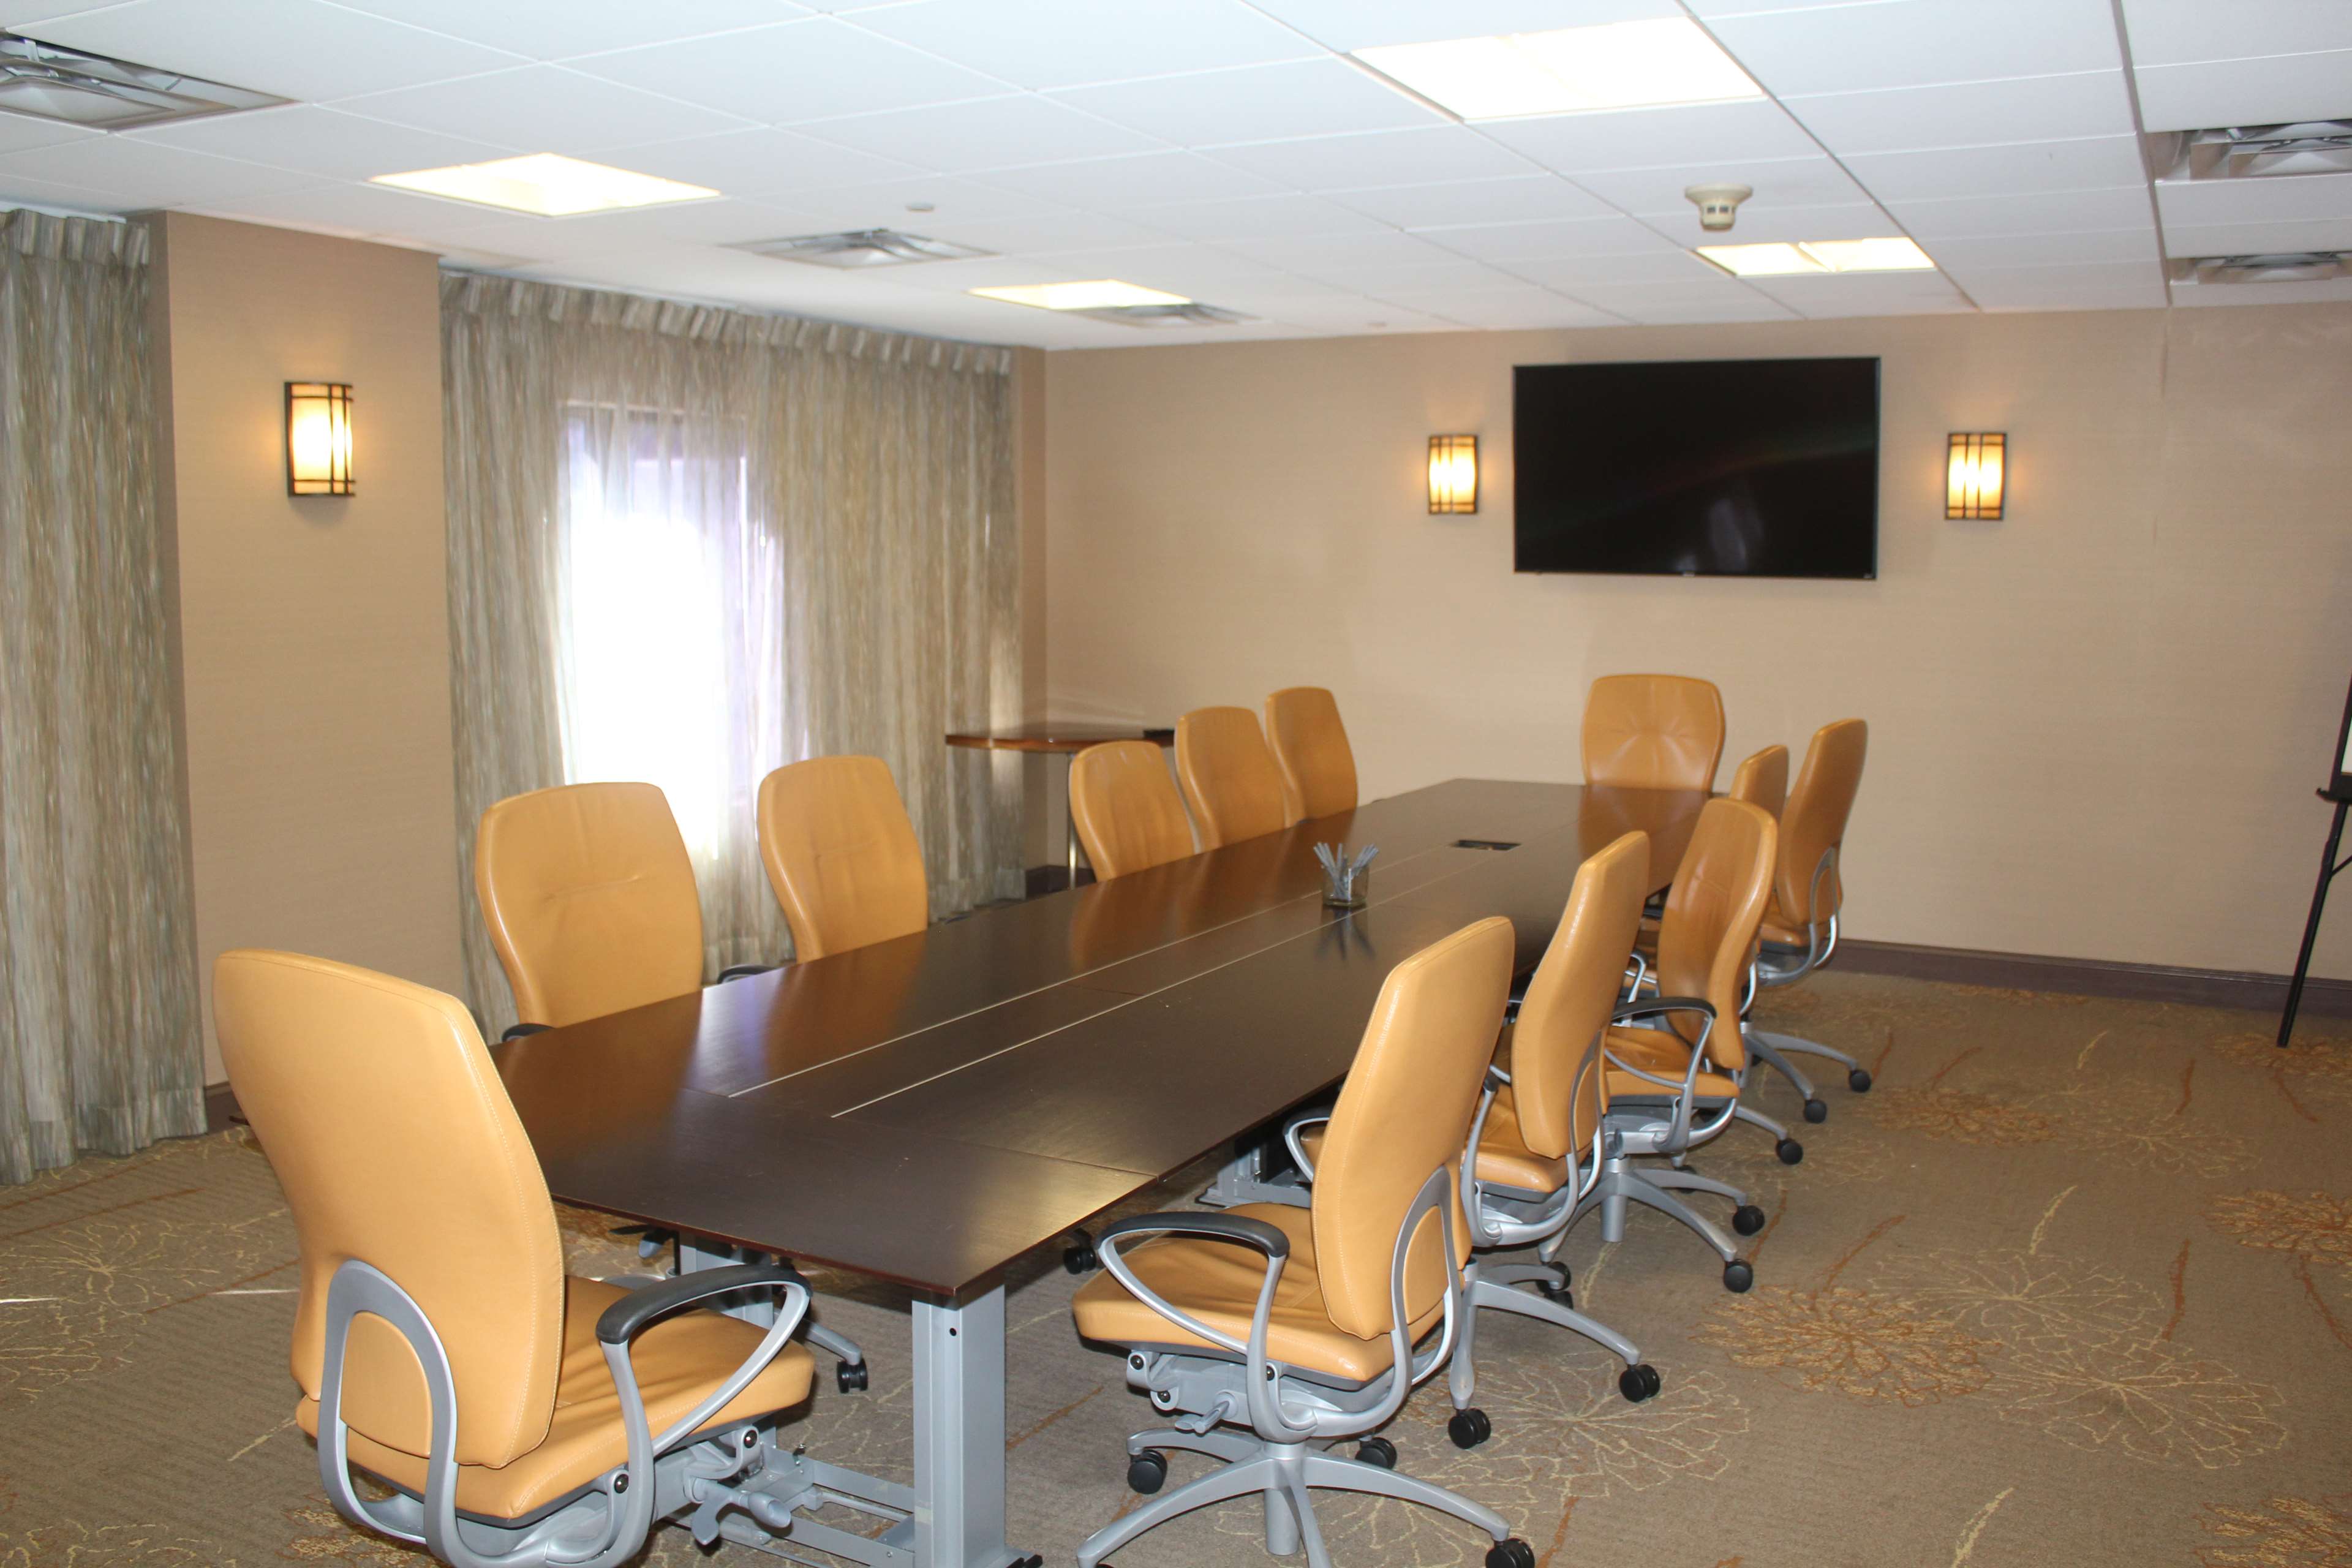 Conference board room